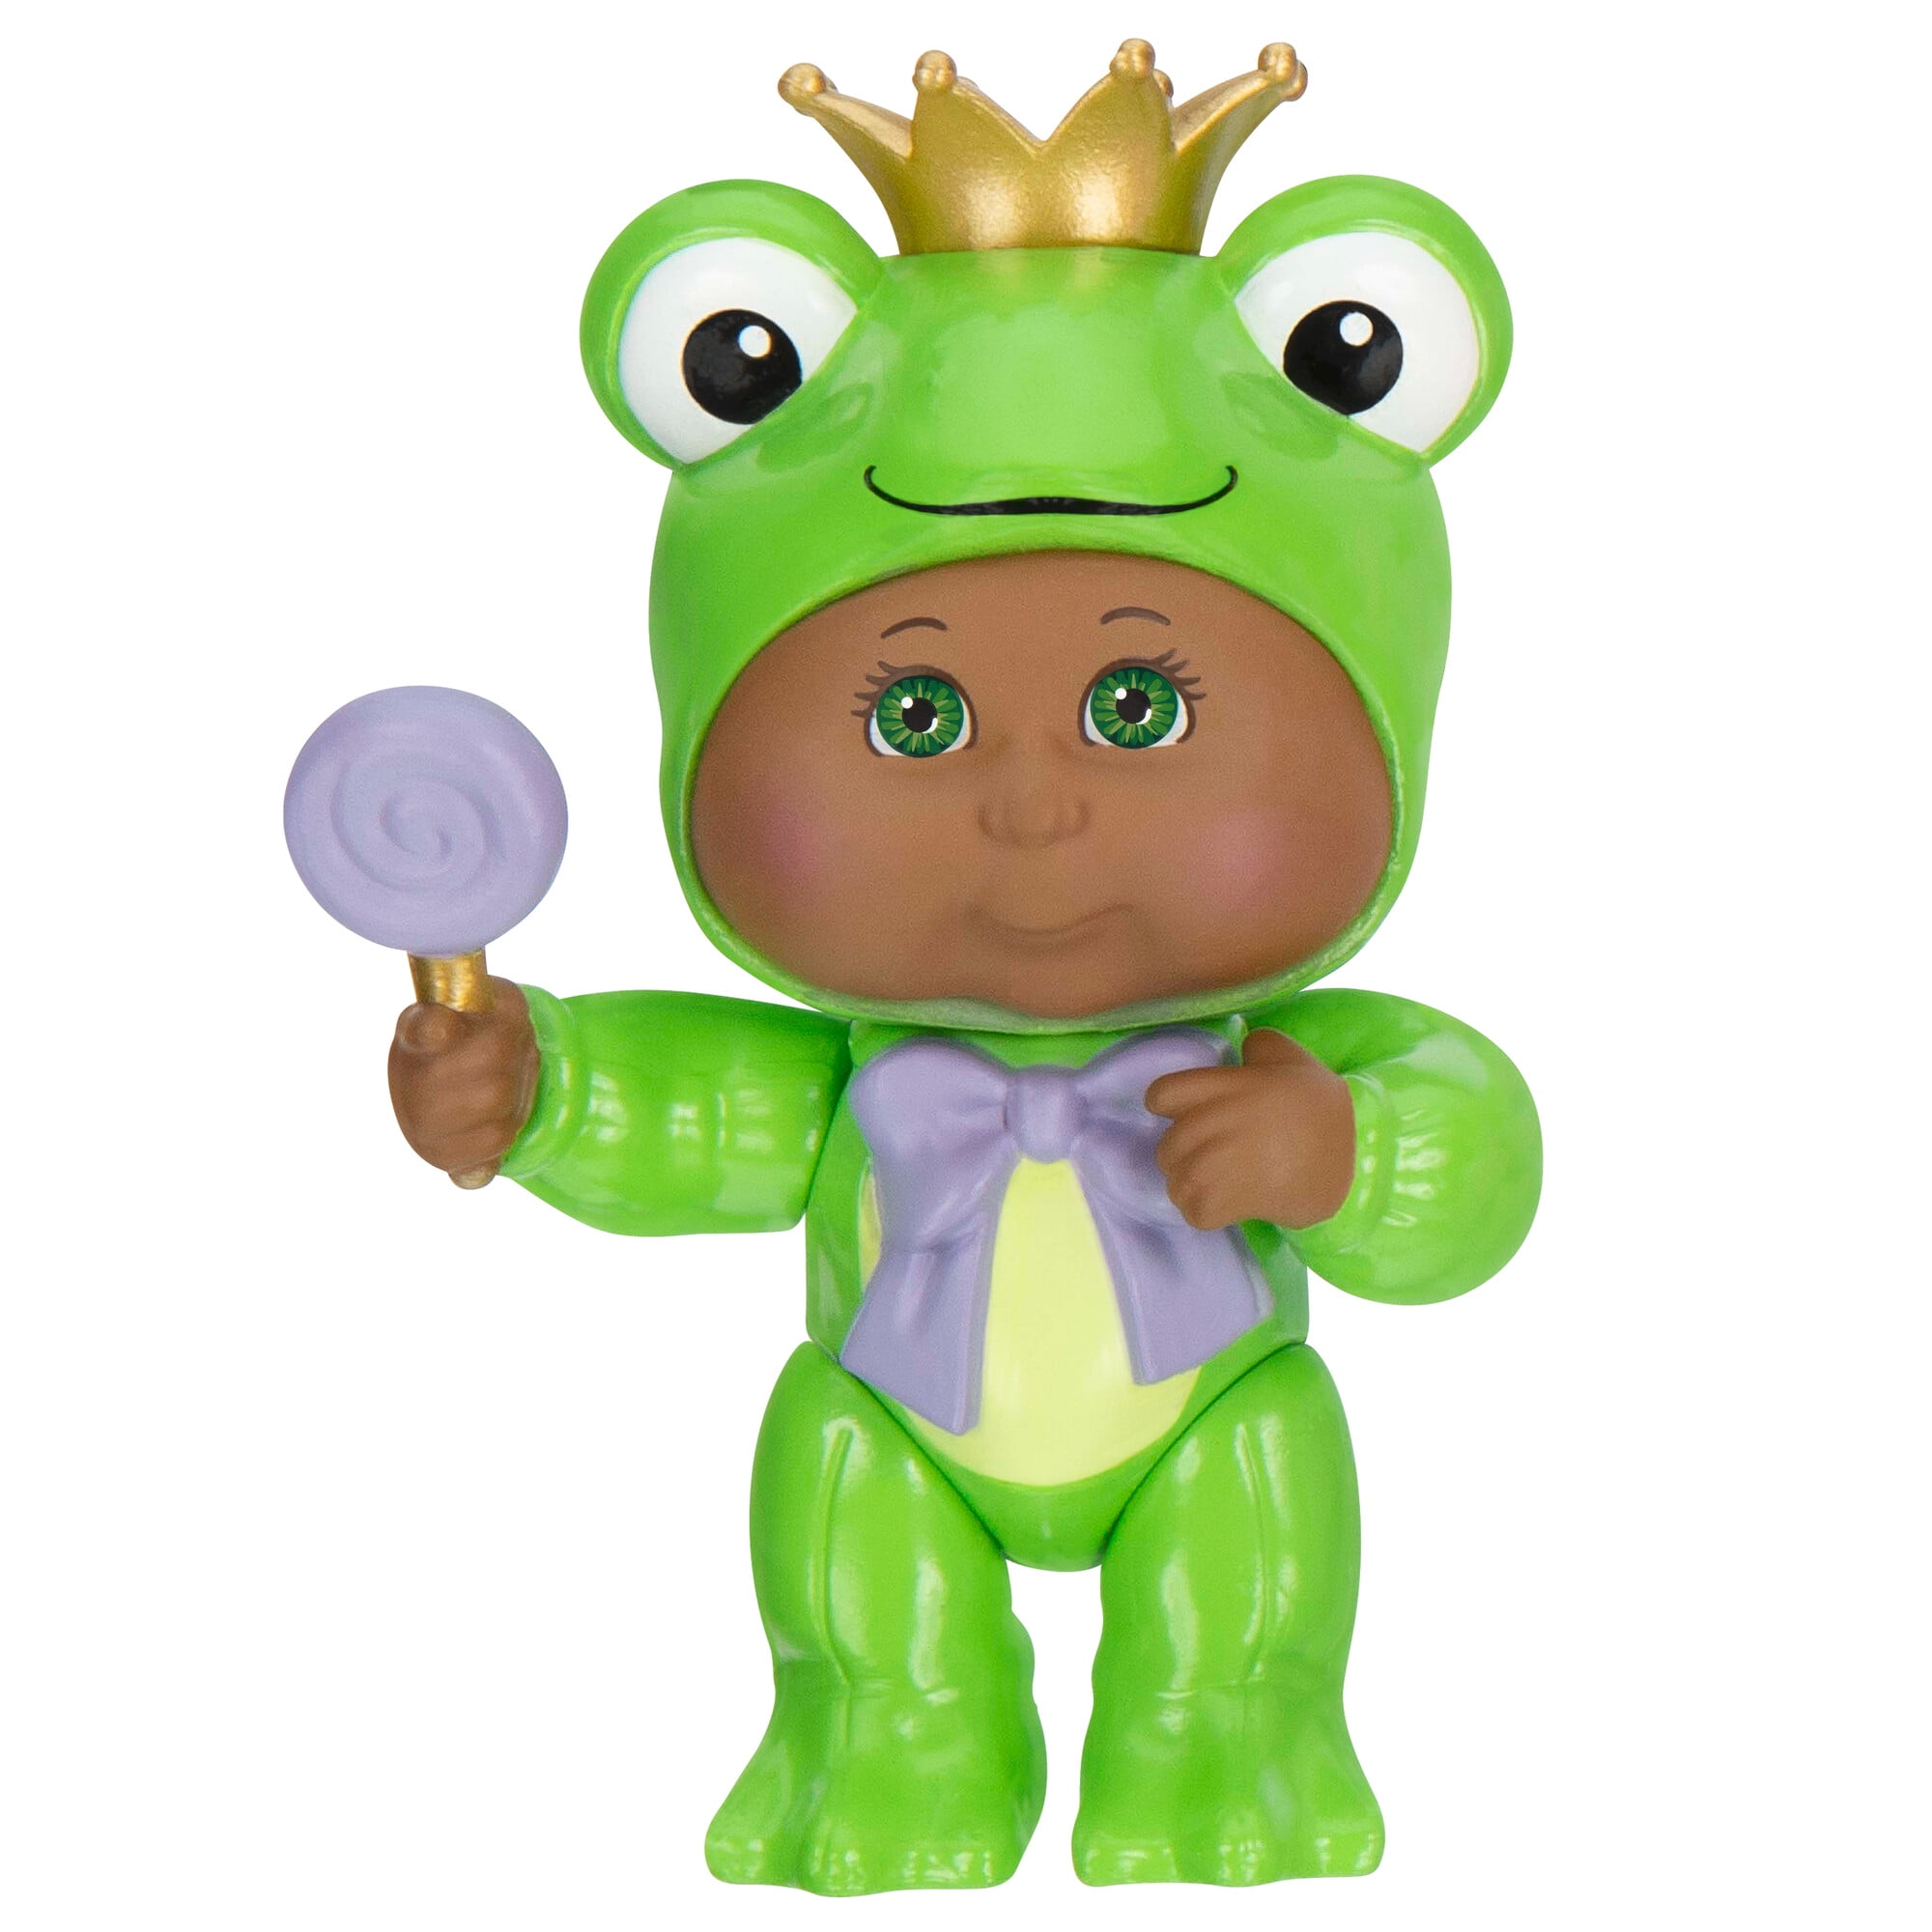 Yeti Unicorn Cabbage Patch Kids Cutietown Fantasy Friends Cabbage Patch Fantasy Friends Grow Your Cabbage Patch 3” Frog Prince Includes Mermaid 4-Figure Pack 